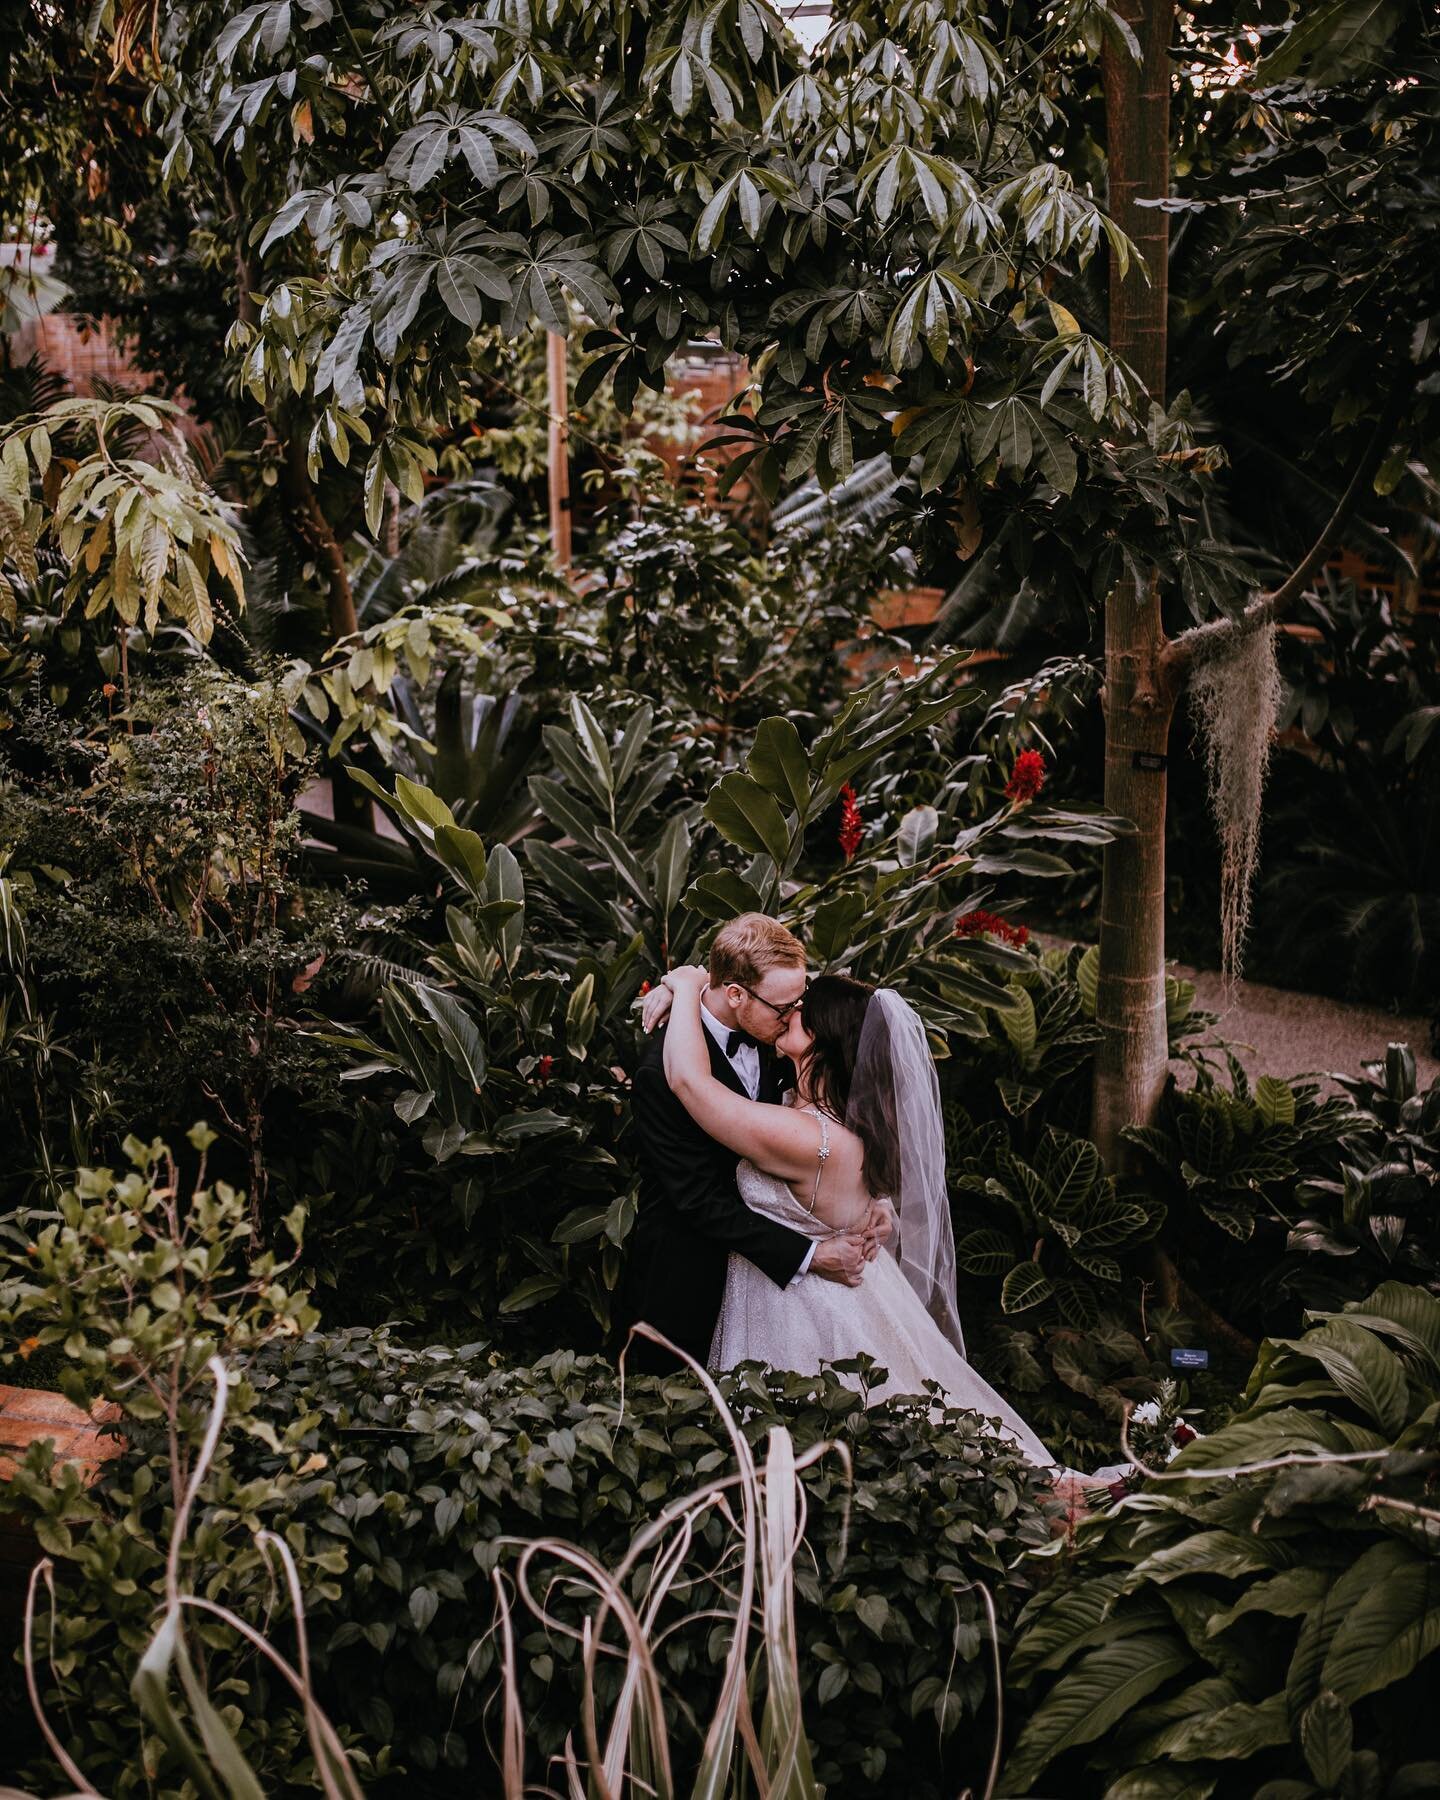 A look back at Madison + Tyler&rsquo;s gorgeous botanical wedding 🥹. These two incredibly kind, sweet souls overwhelmed me with the genuine love they share. Their smiles never left their faces for a single moment, even when happy tears were shed. I 